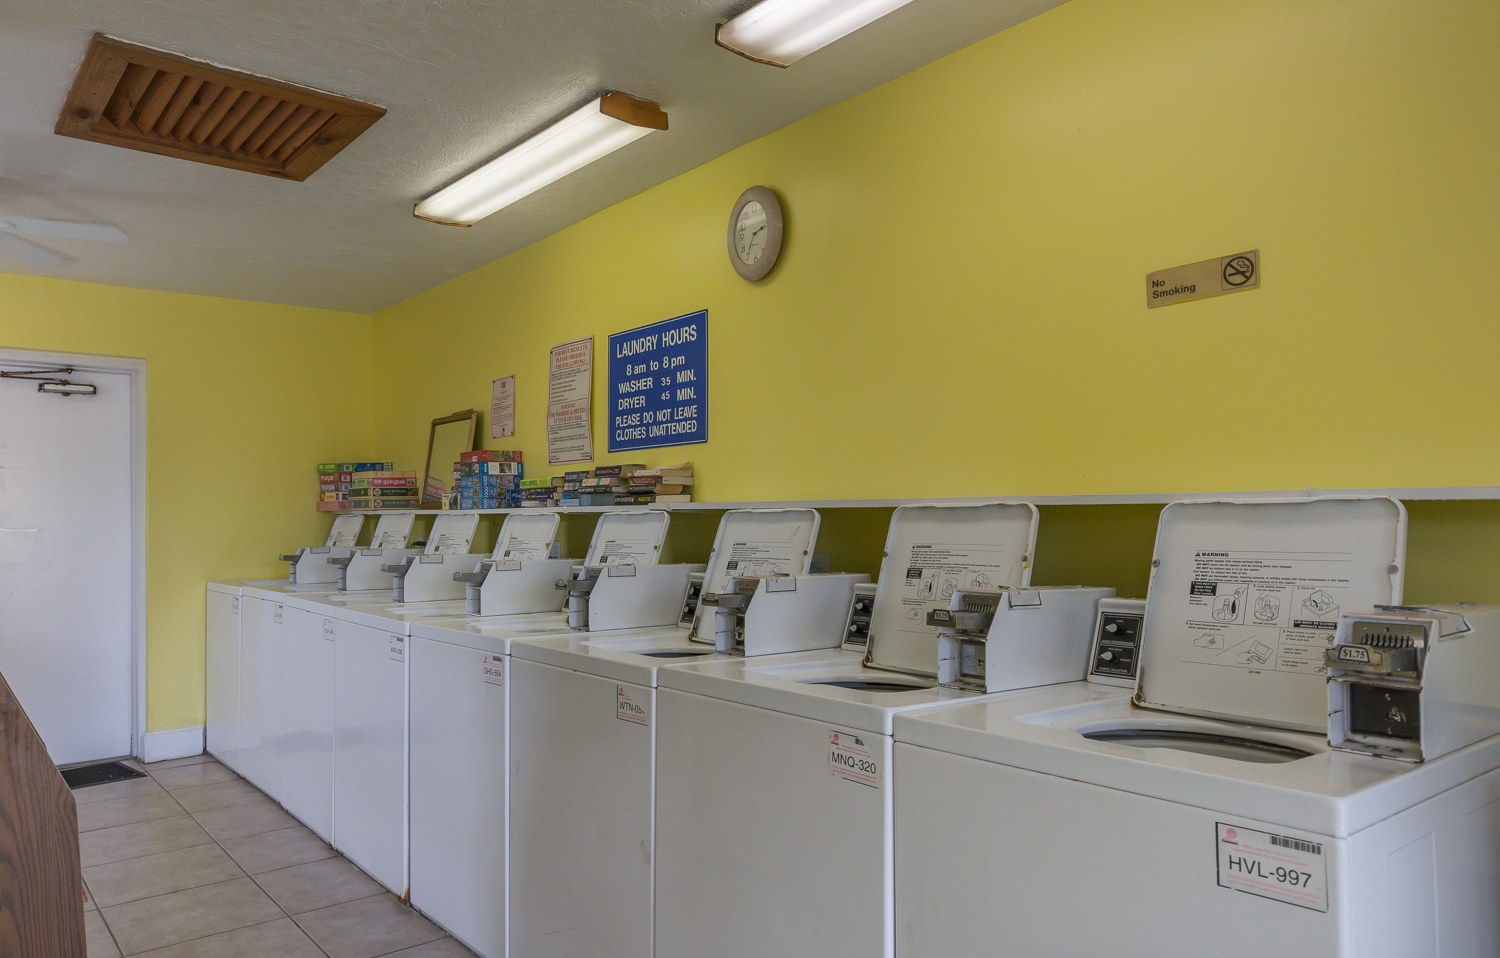 Community area with washer and dryers